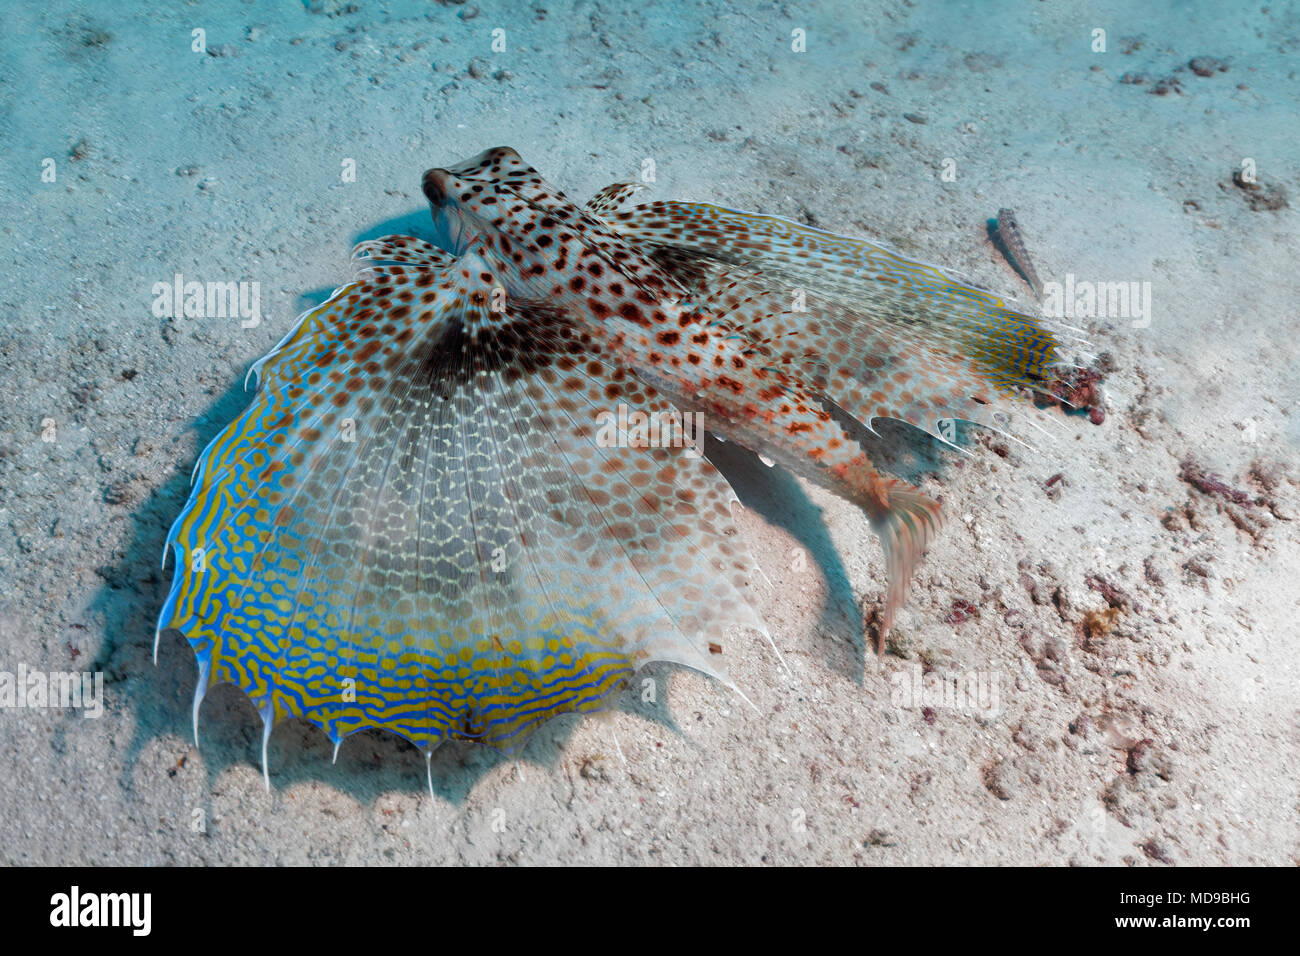 Oriental flying gurnard (Dactyloptena orientalis) with extended fins at the sandy bottom, Indian Ocean, Maldives Stock Photo